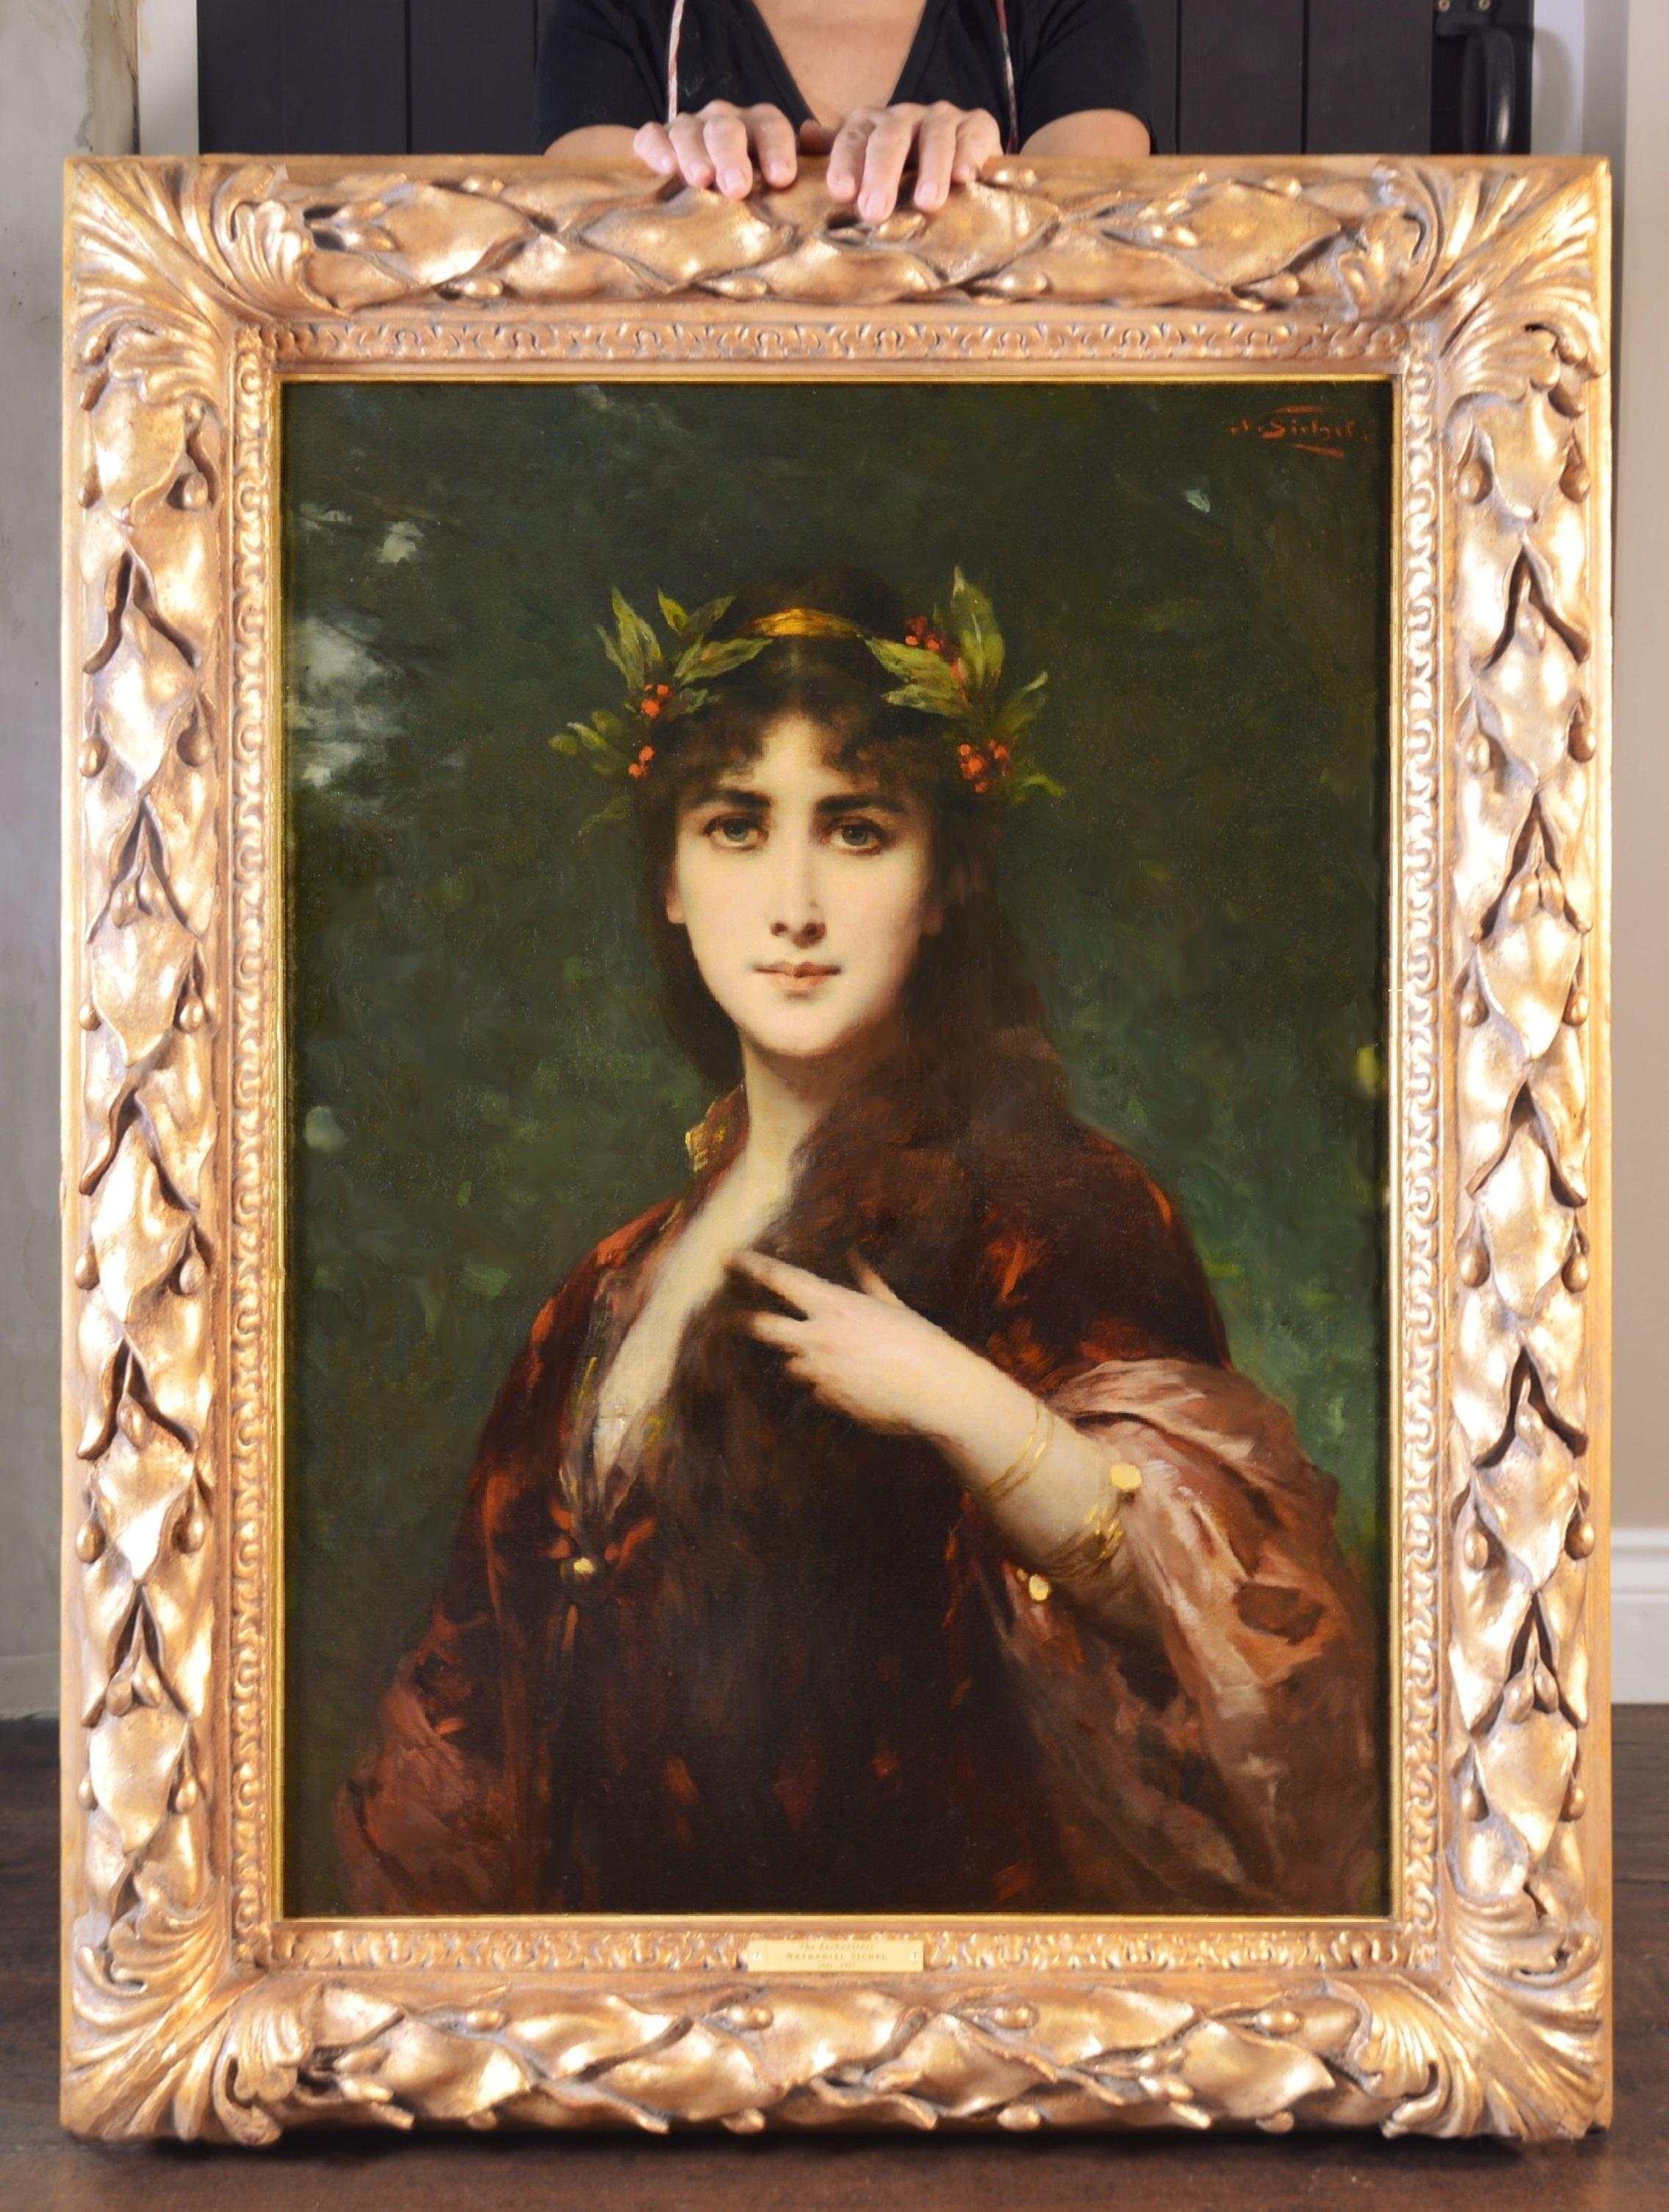 Nathaniel Sichel Figurative Painting - The Enchantress - 19th Century Belle Epoque Portrait  Oil Painting French Beauty